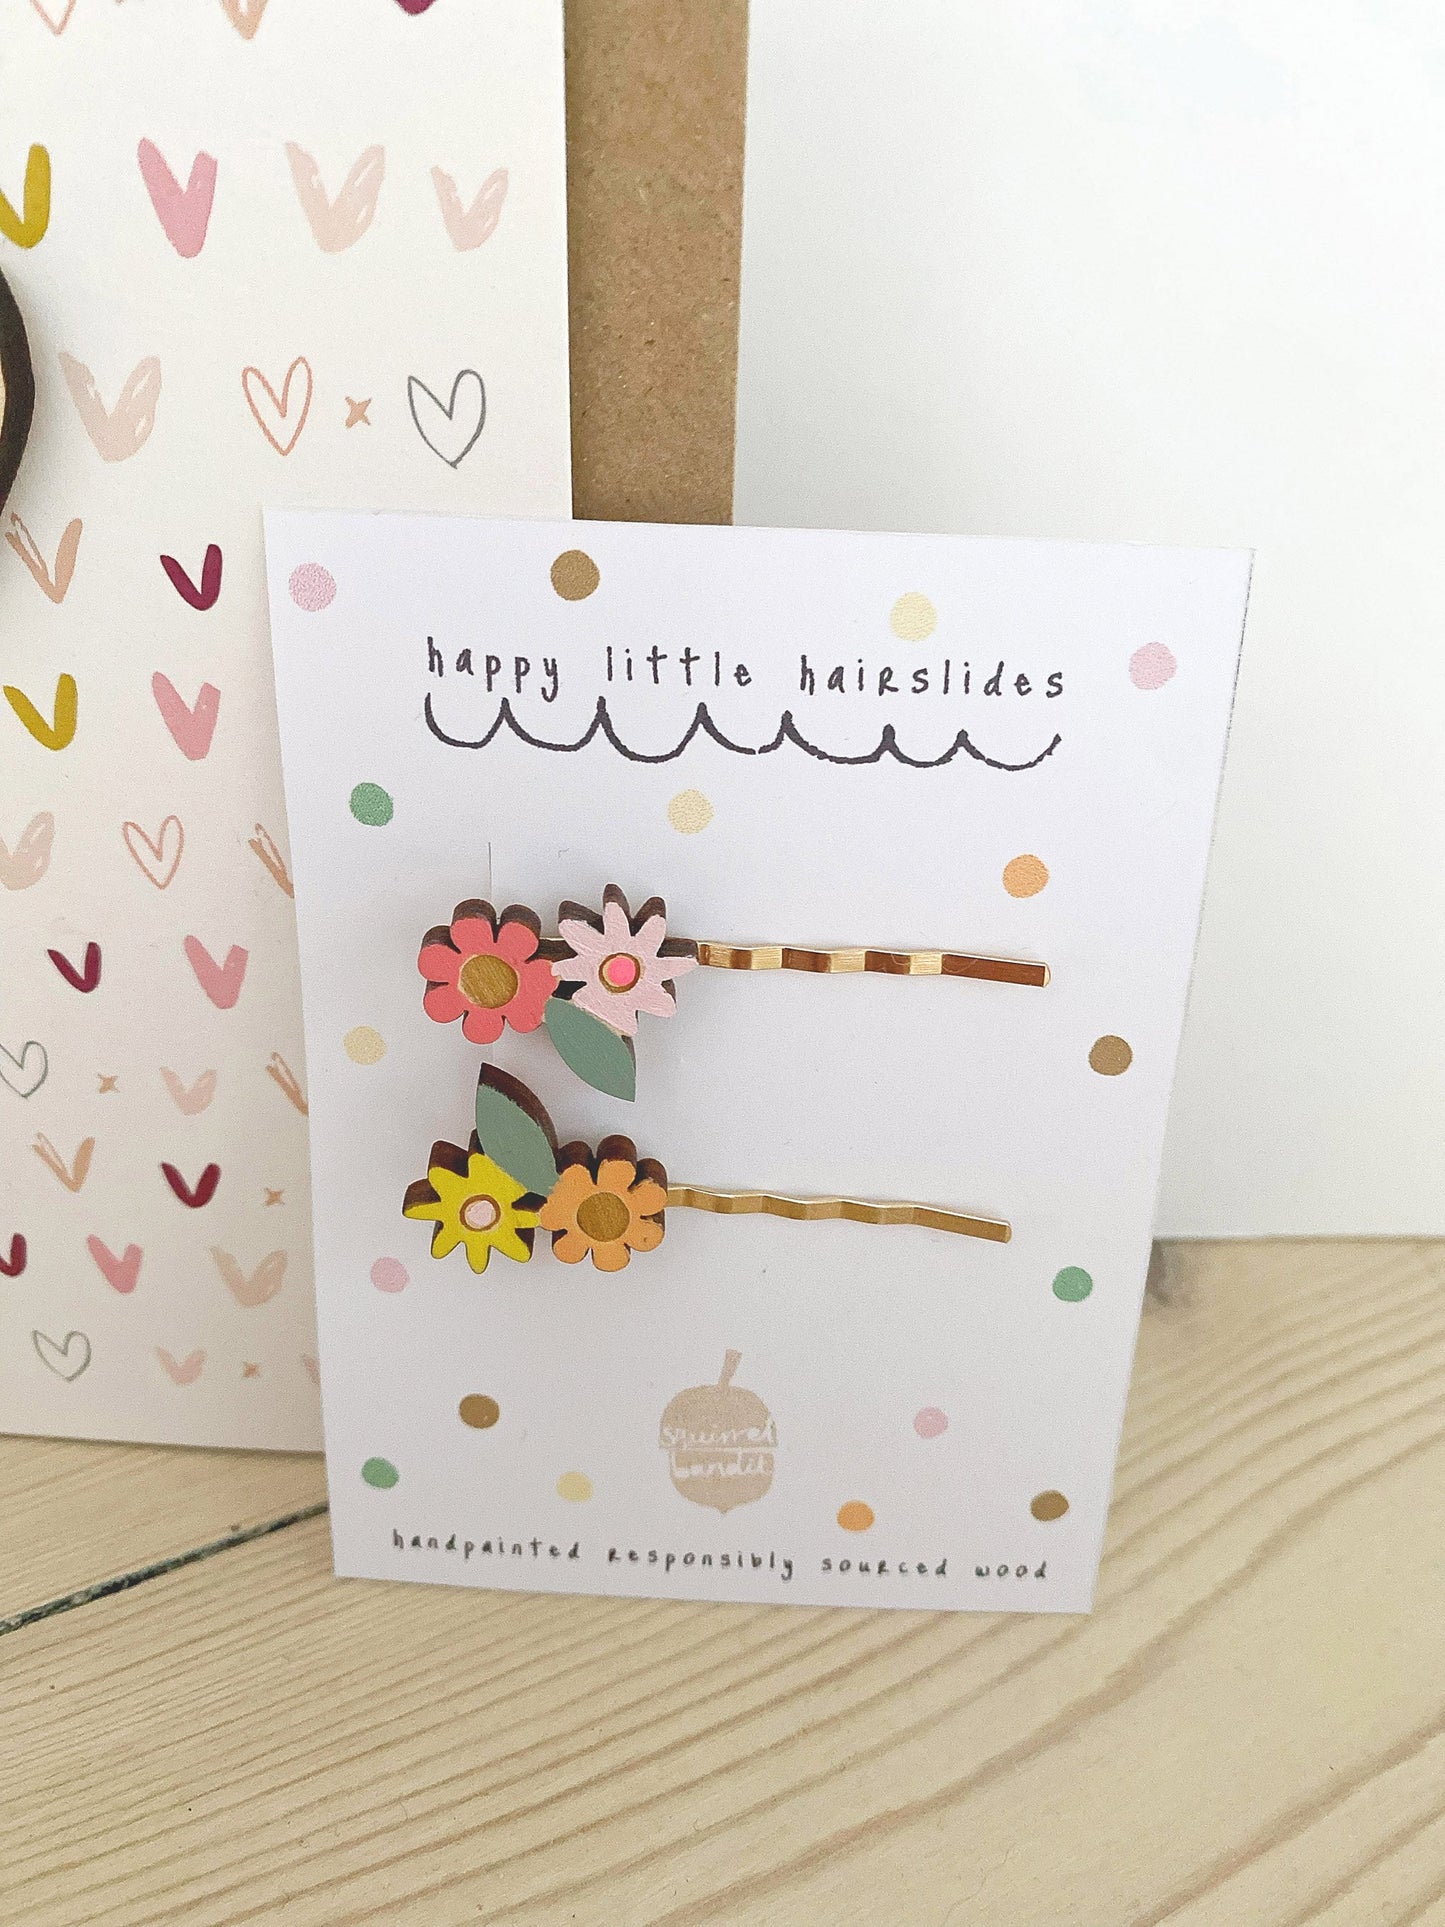 Hand-painted pretty wooden floral hairslides